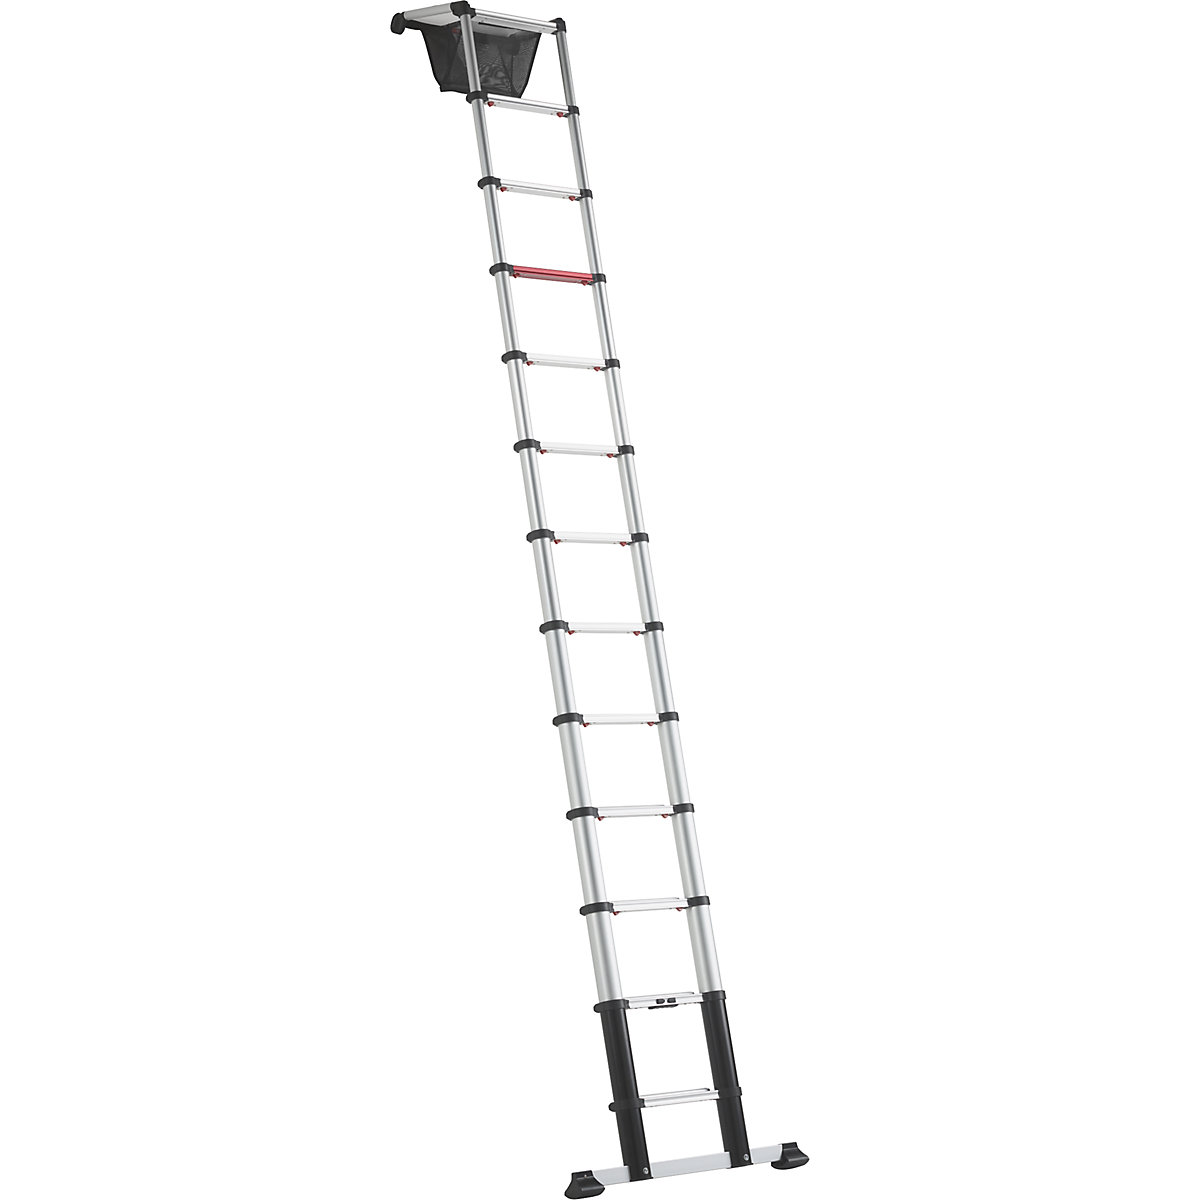 Telescopic lean-to ladder – Altrex, Smart Up Pro, 13 rungs, length 3.8 m-8